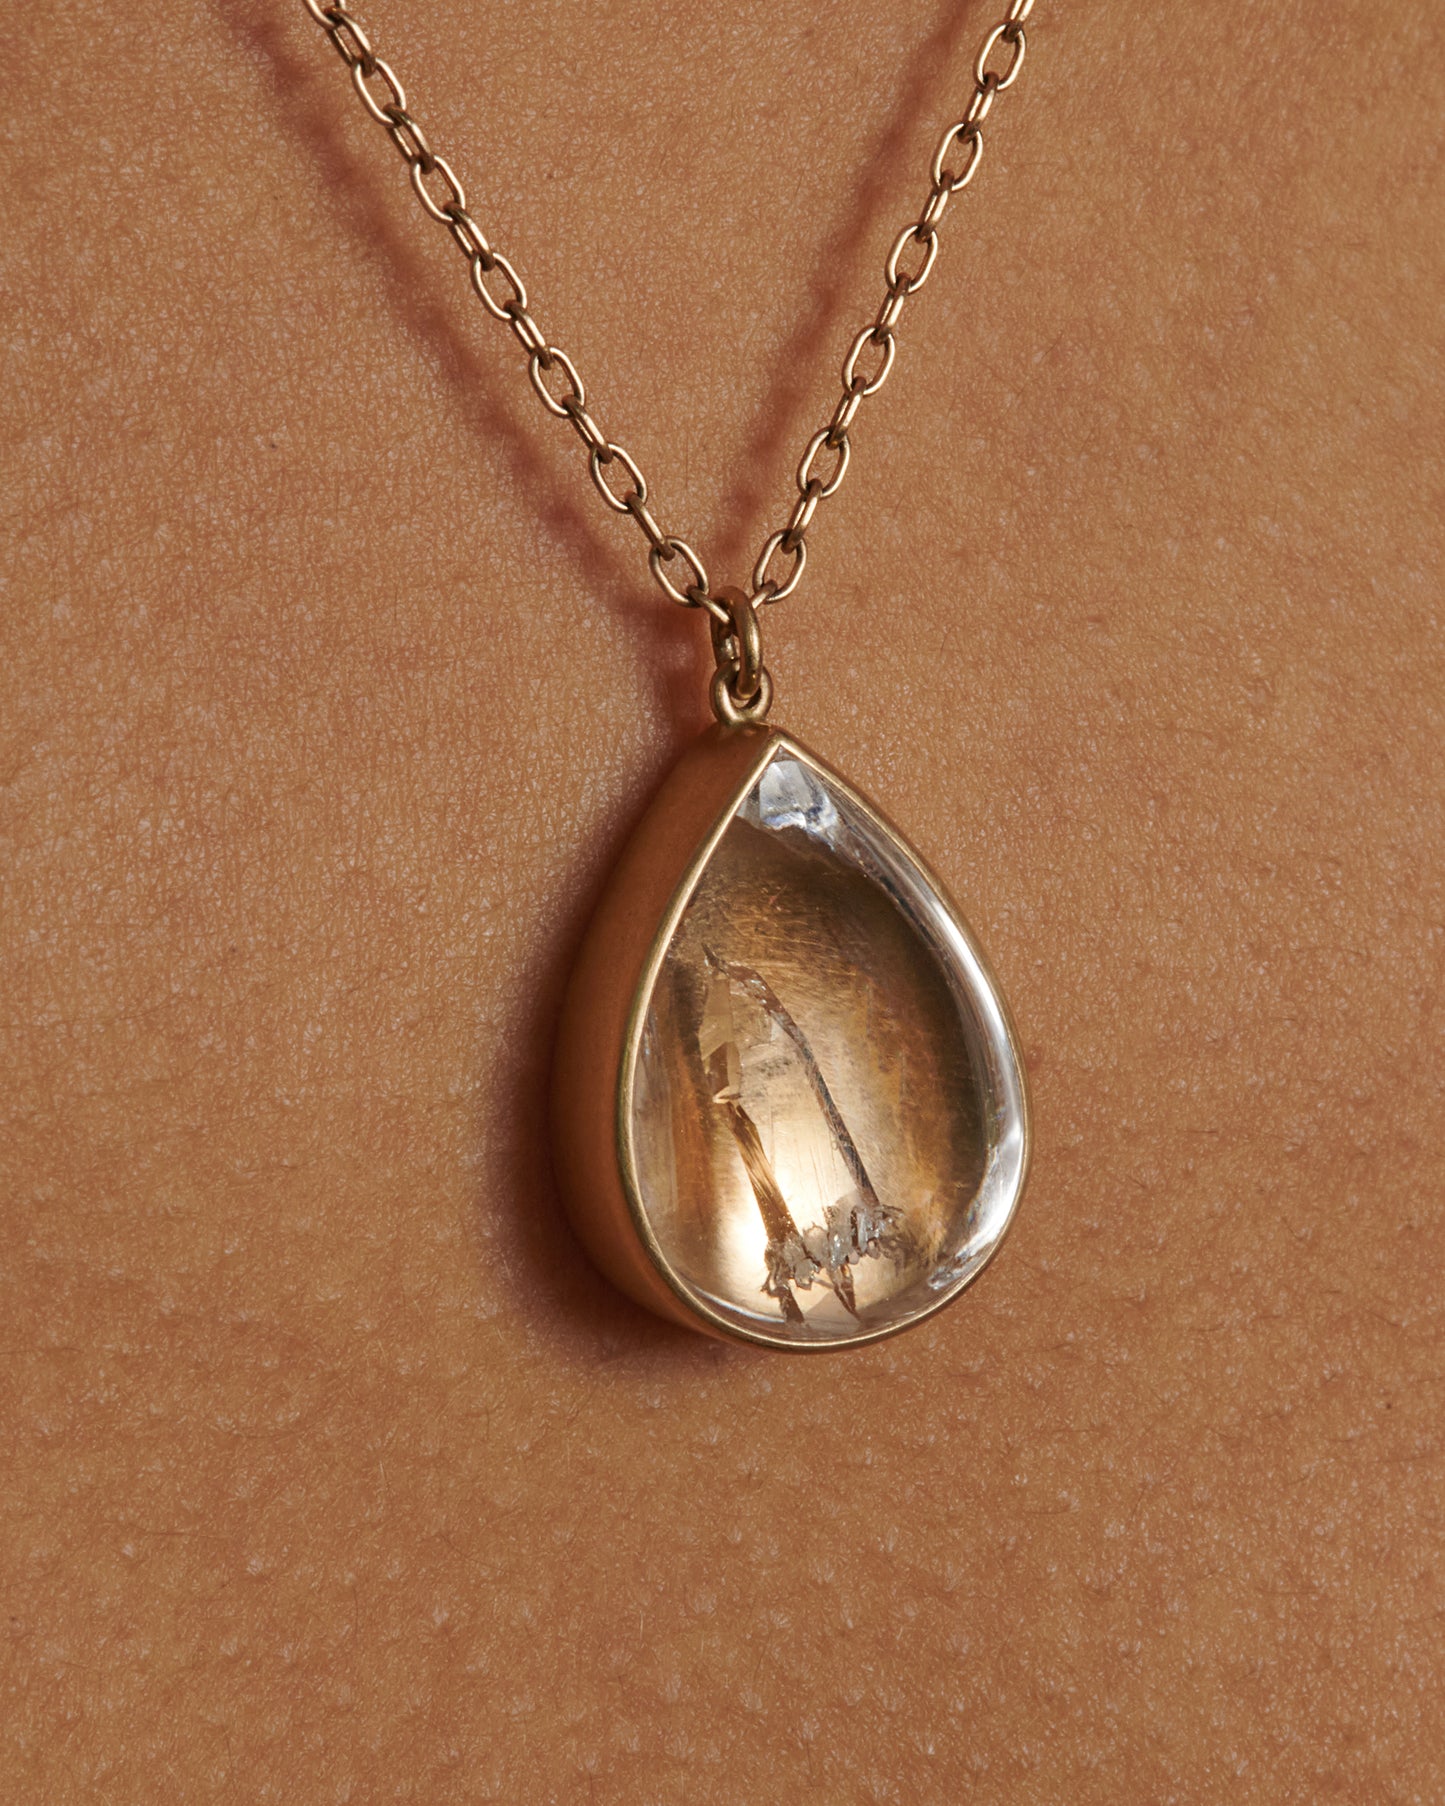 A quartz crystal teardrop pendant sitting on a fine 18k yellow gold chain. We love this piece for its stunning simplicity, making it a perfect daily staple that can be easily layered with alongside mixed metals and different stones.